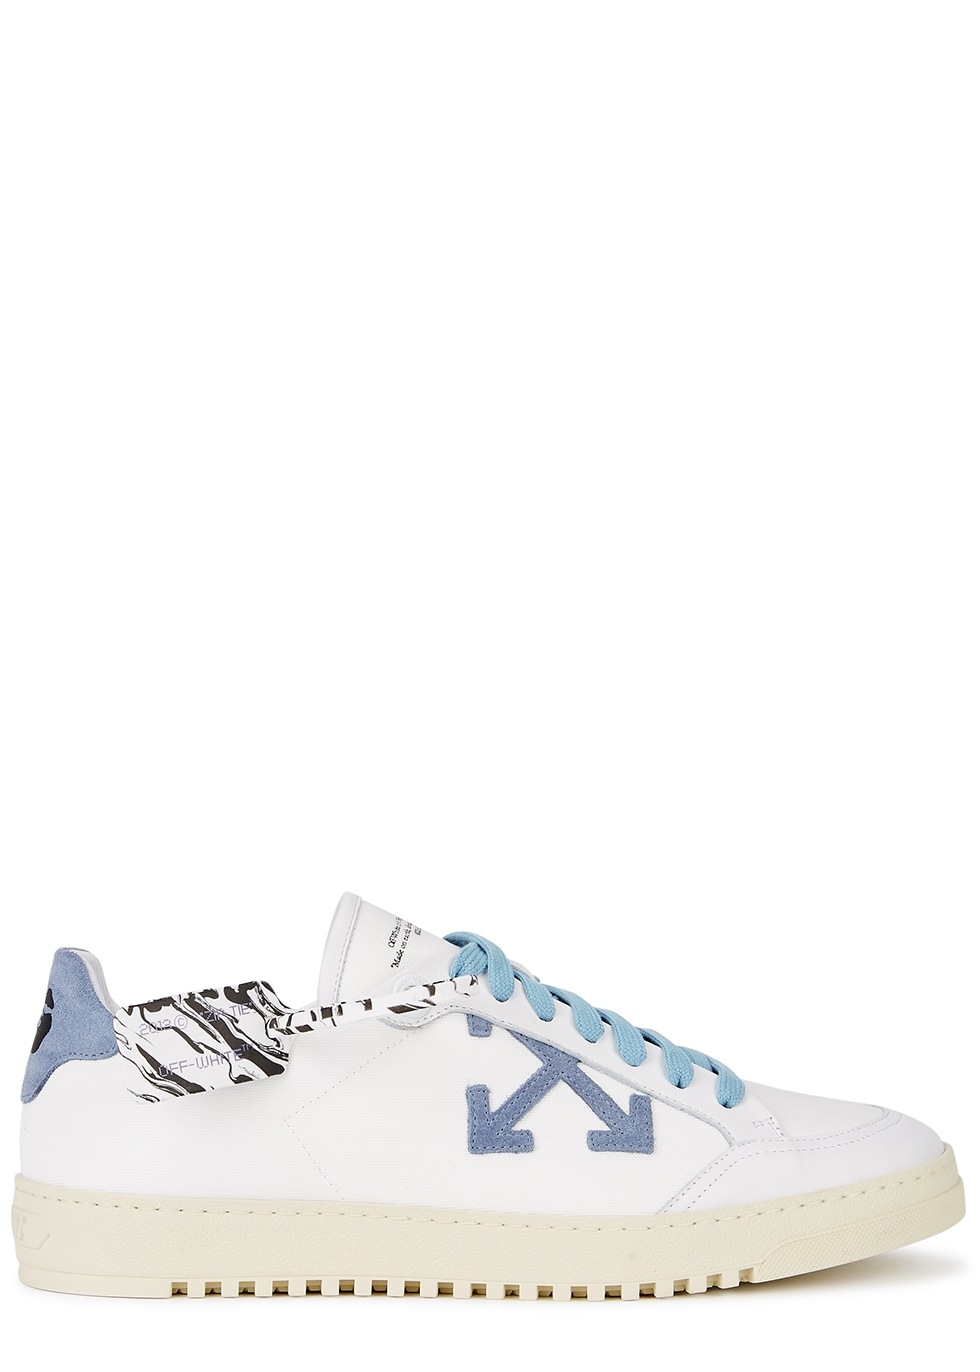 Off-White 2.0 white canvas sneakers 